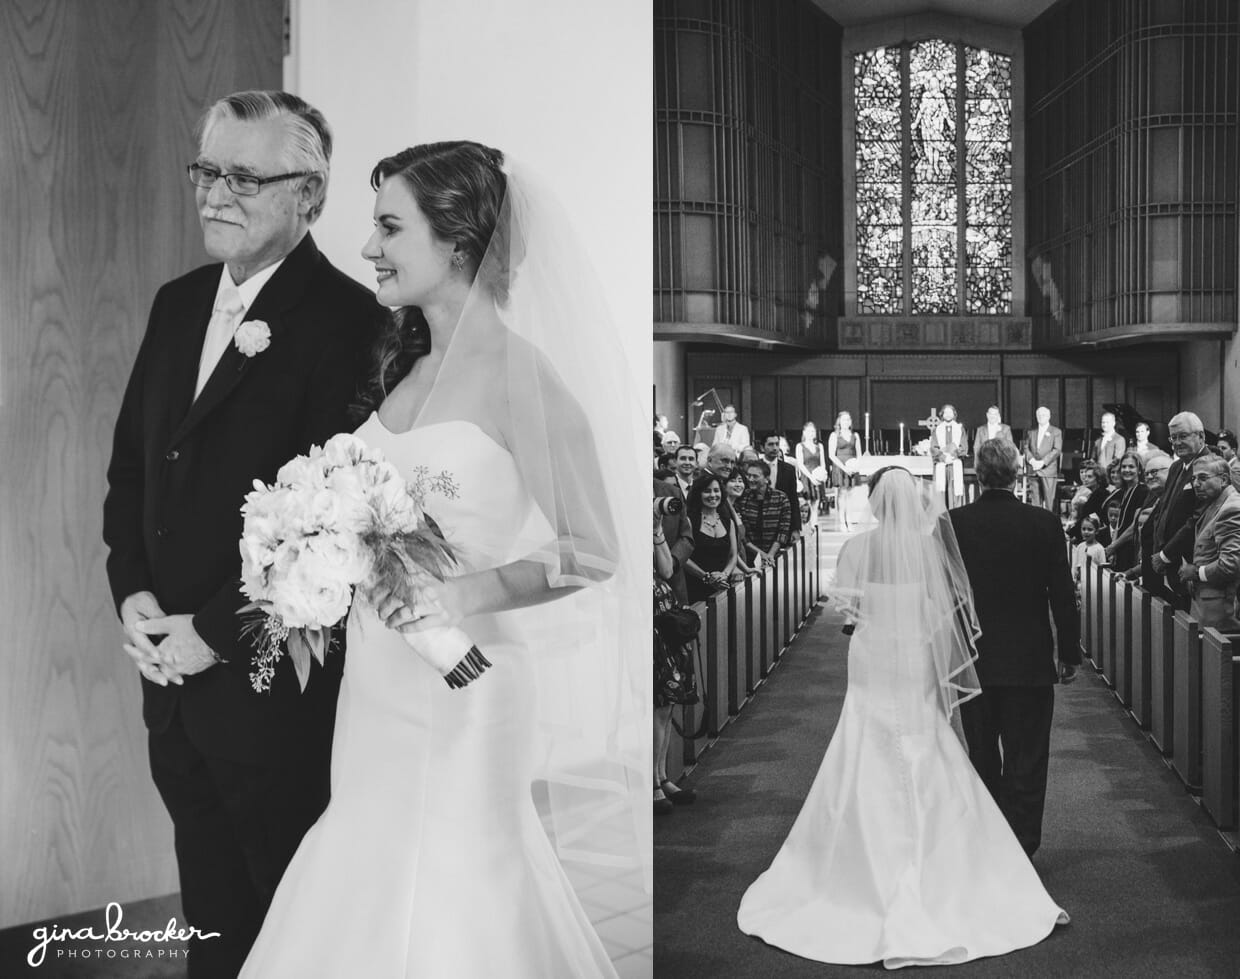 A Bride walks up the aisle with her father during their classic and elegant wedding in Boston, Massachusetts